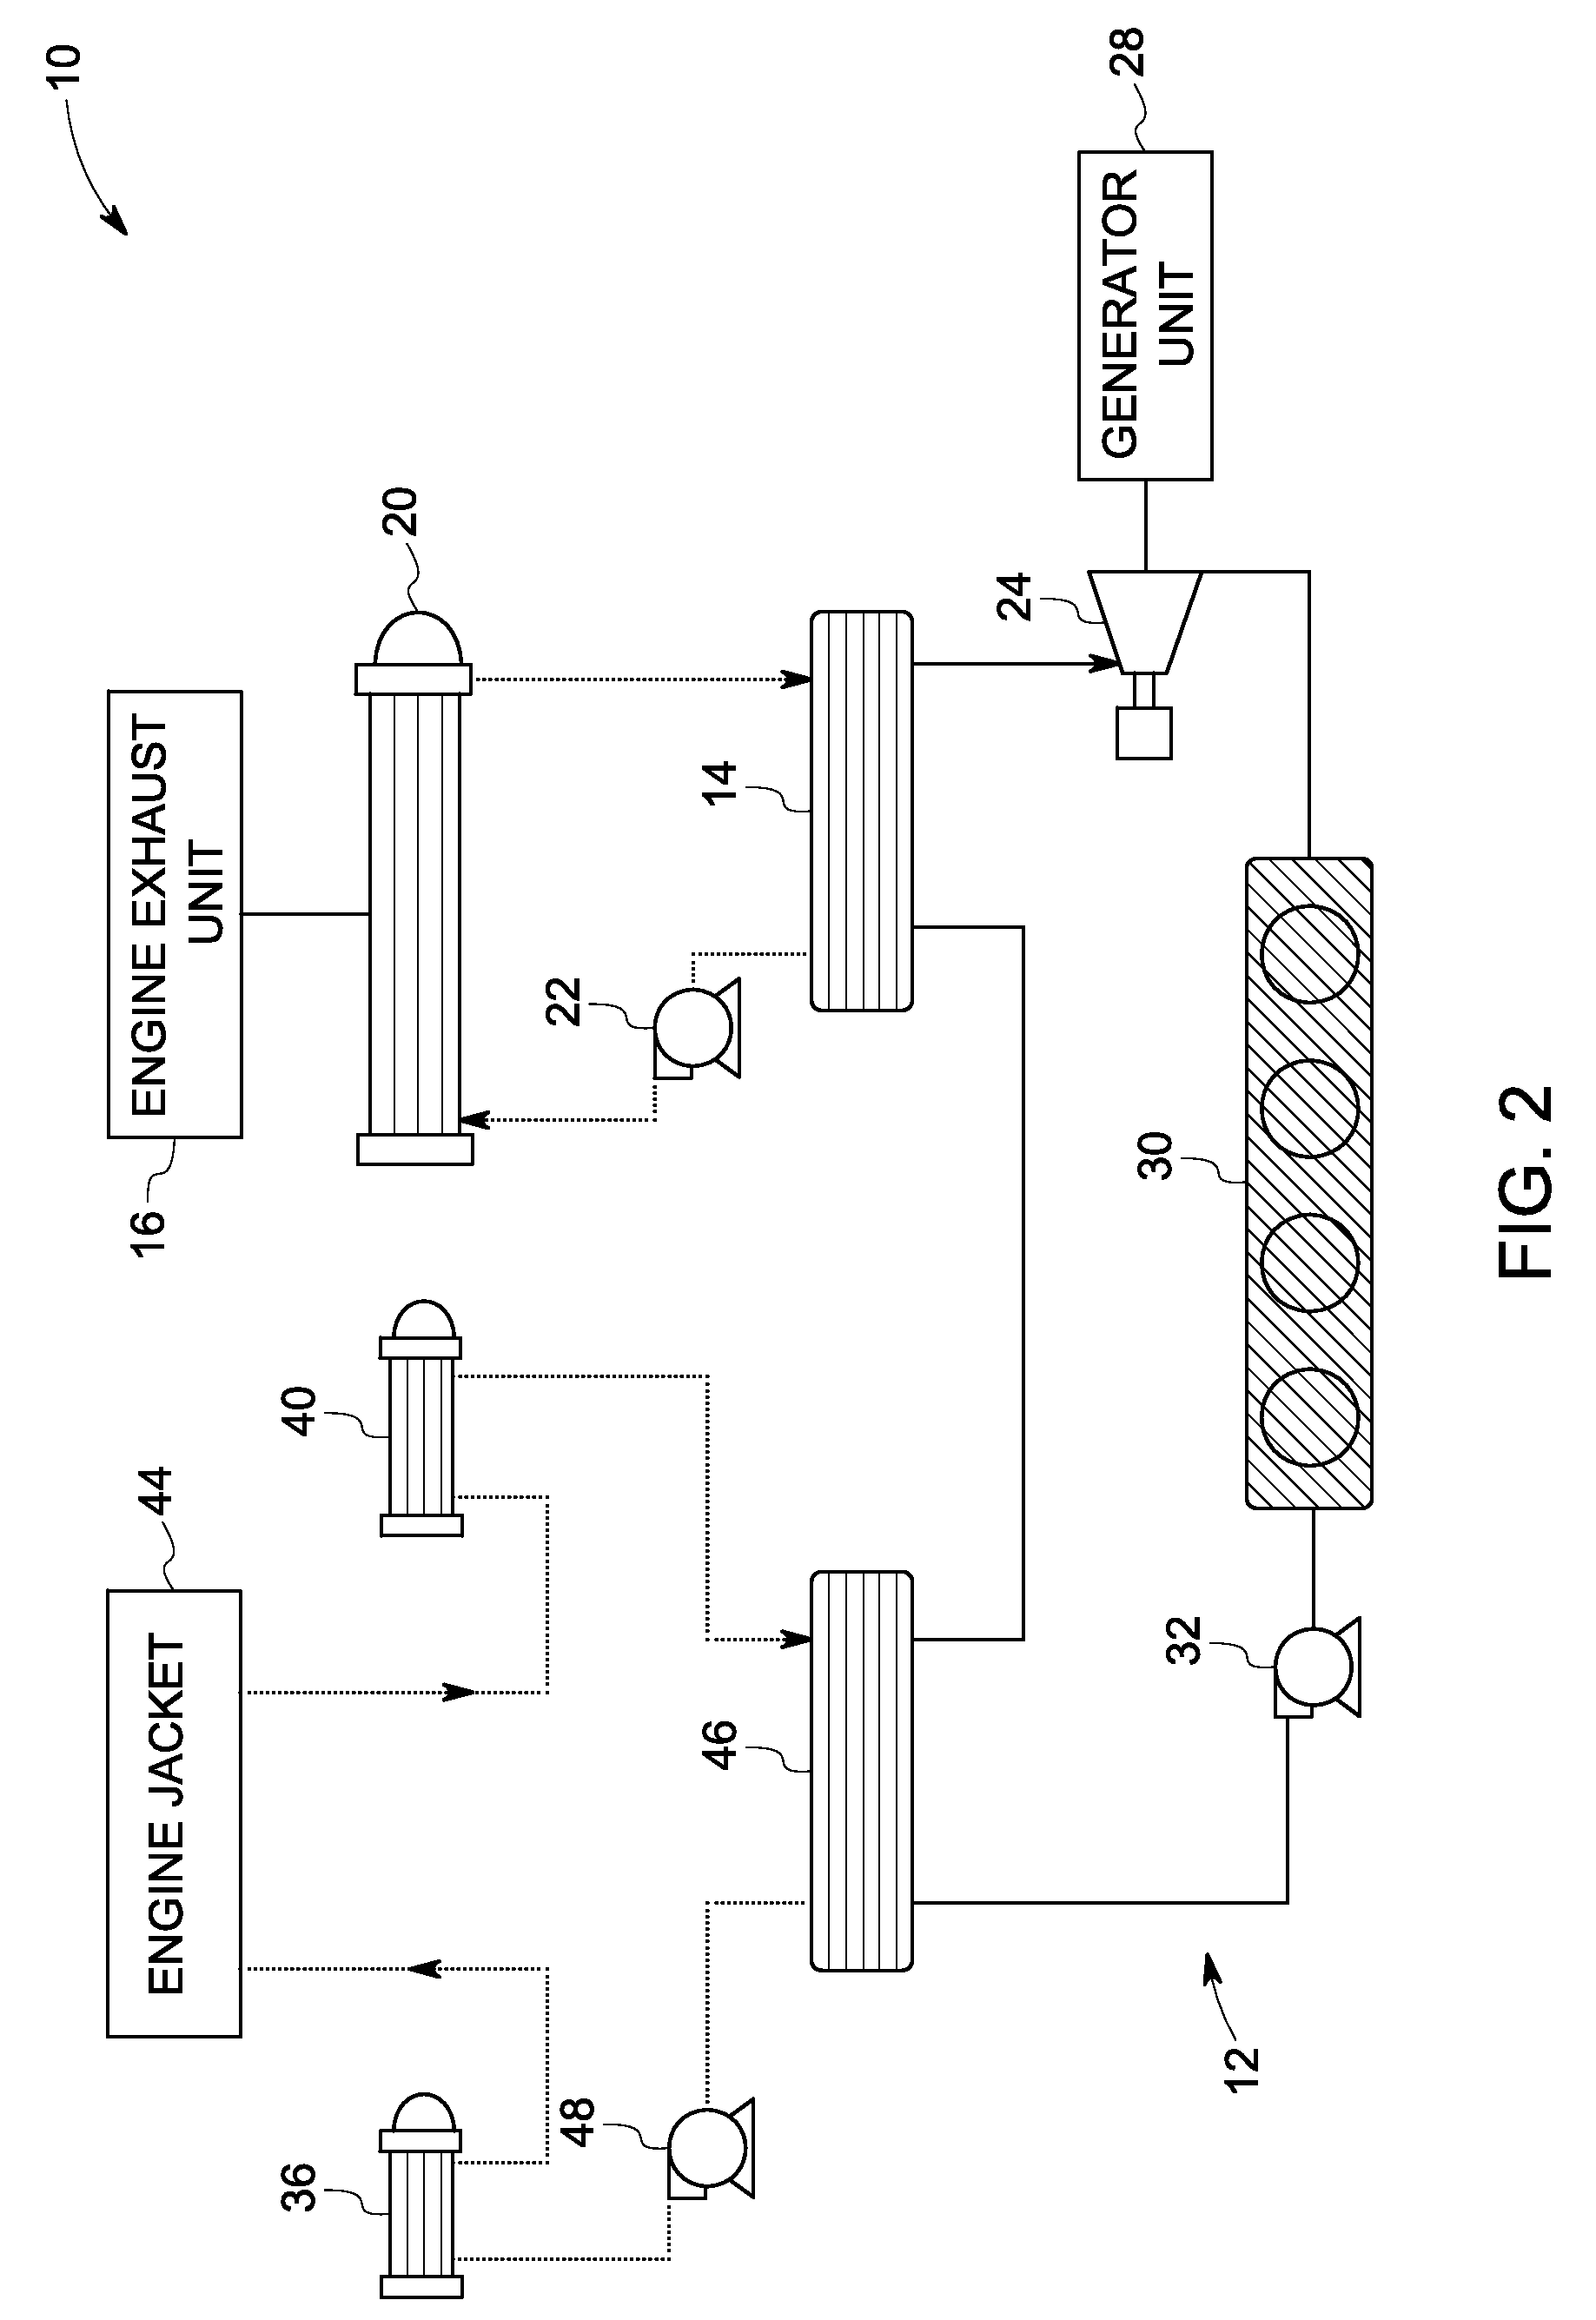 System for recovering waste heat